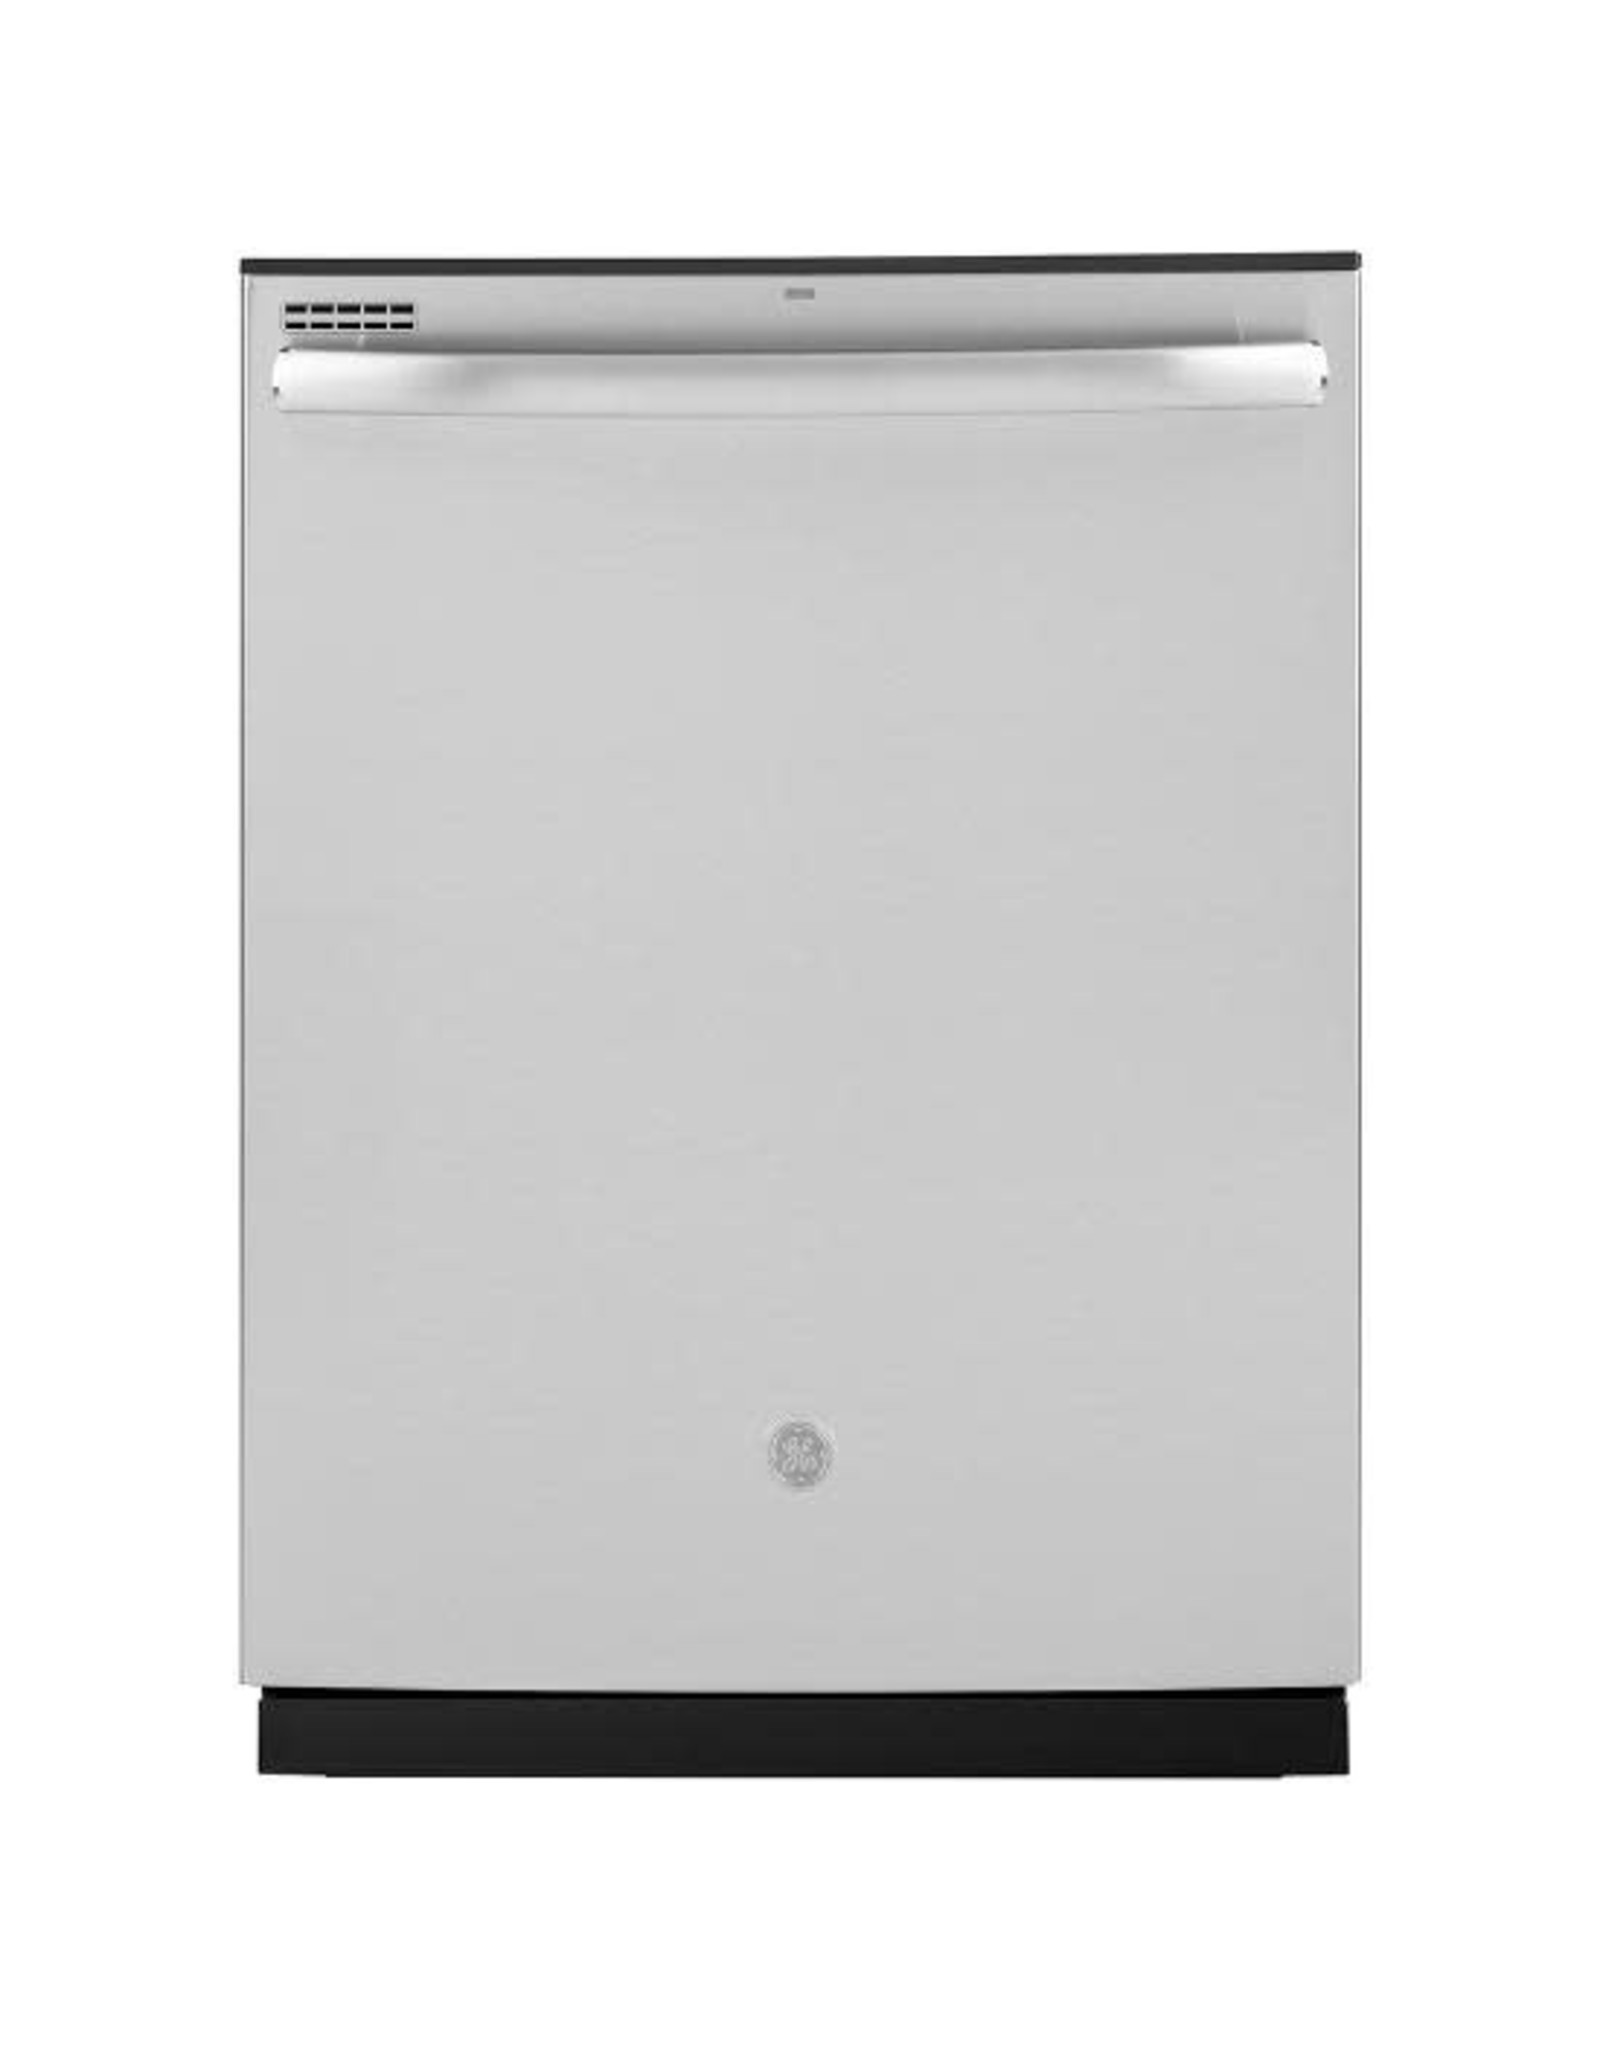 GE GDT605PSMSS 24 in. Stainless Steel Top Control Built-In Tall Tub Dishwasher 120-Volt with Steam Cleaning and 50 dBA